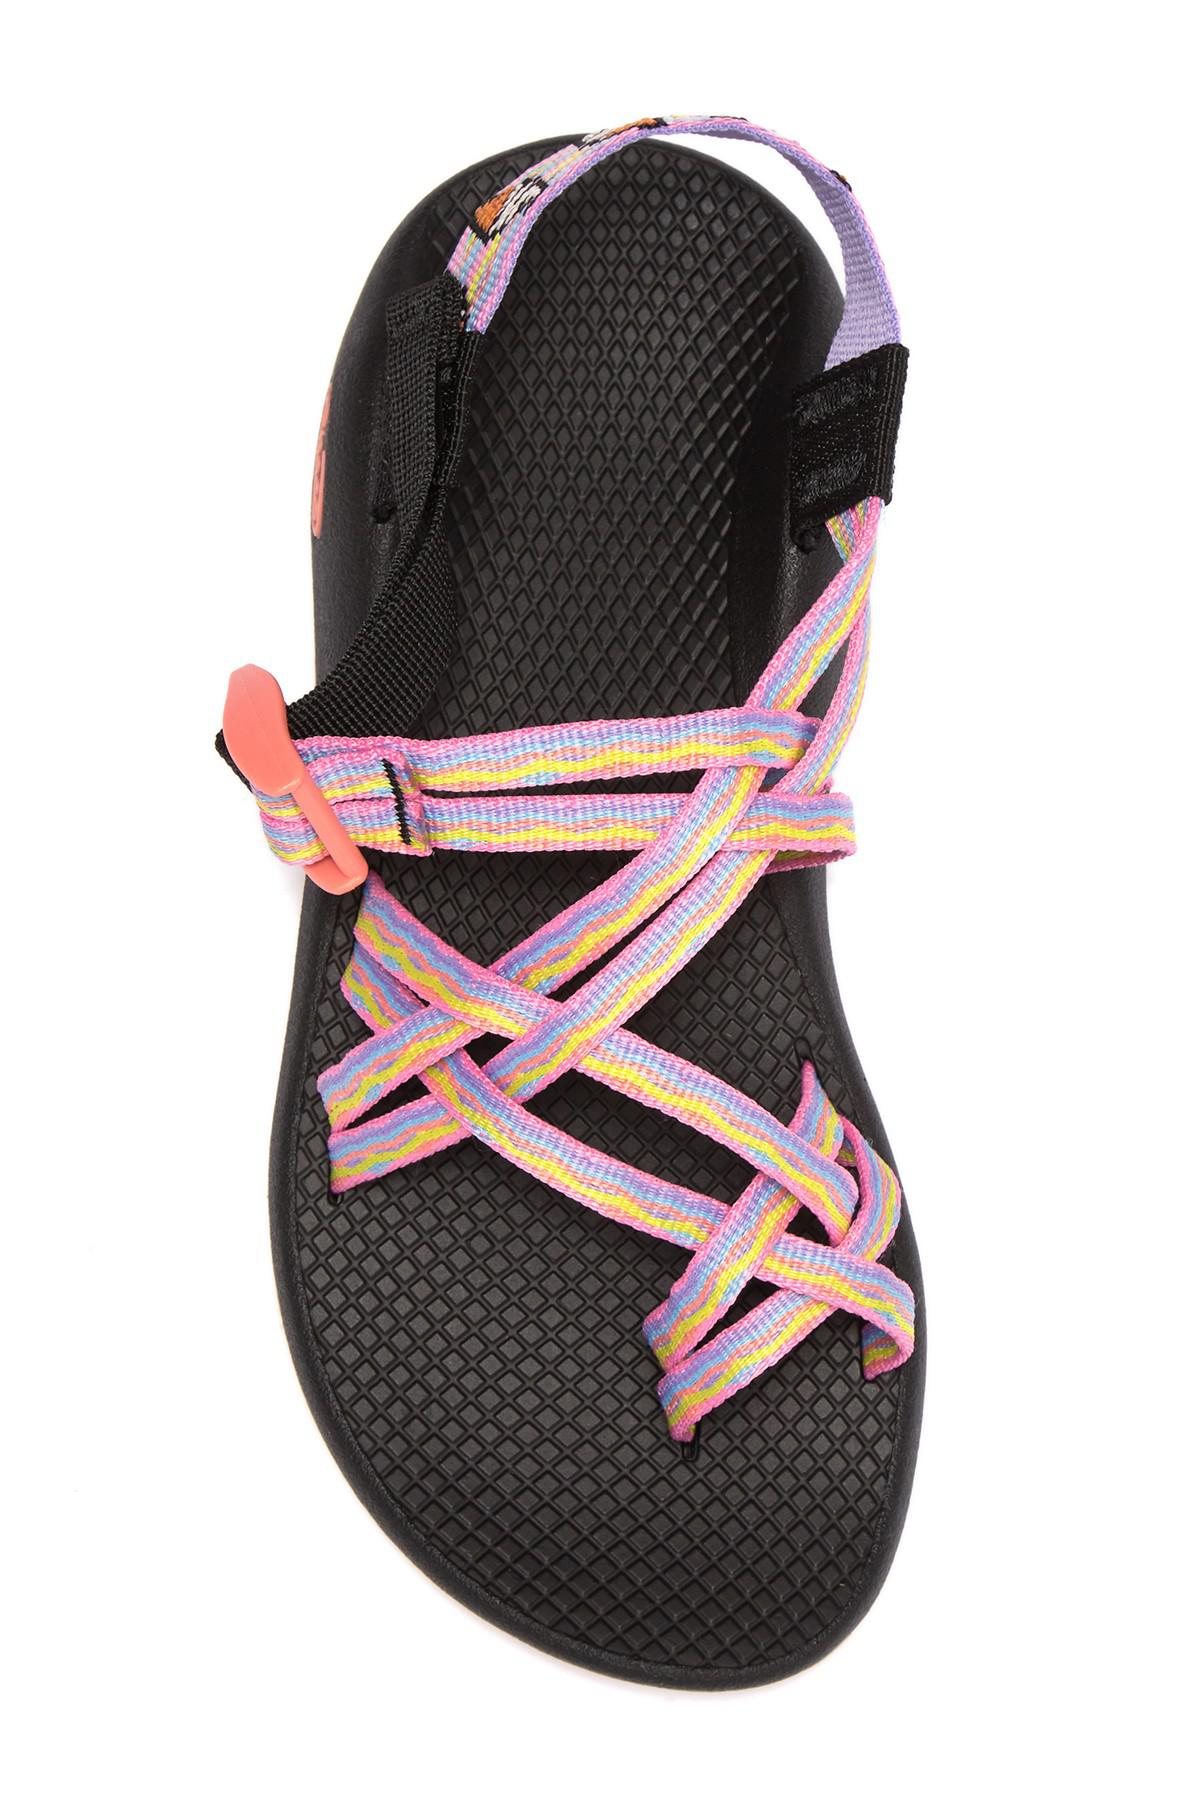 Chaco Zx2 Classic Ice Cream Pattern 